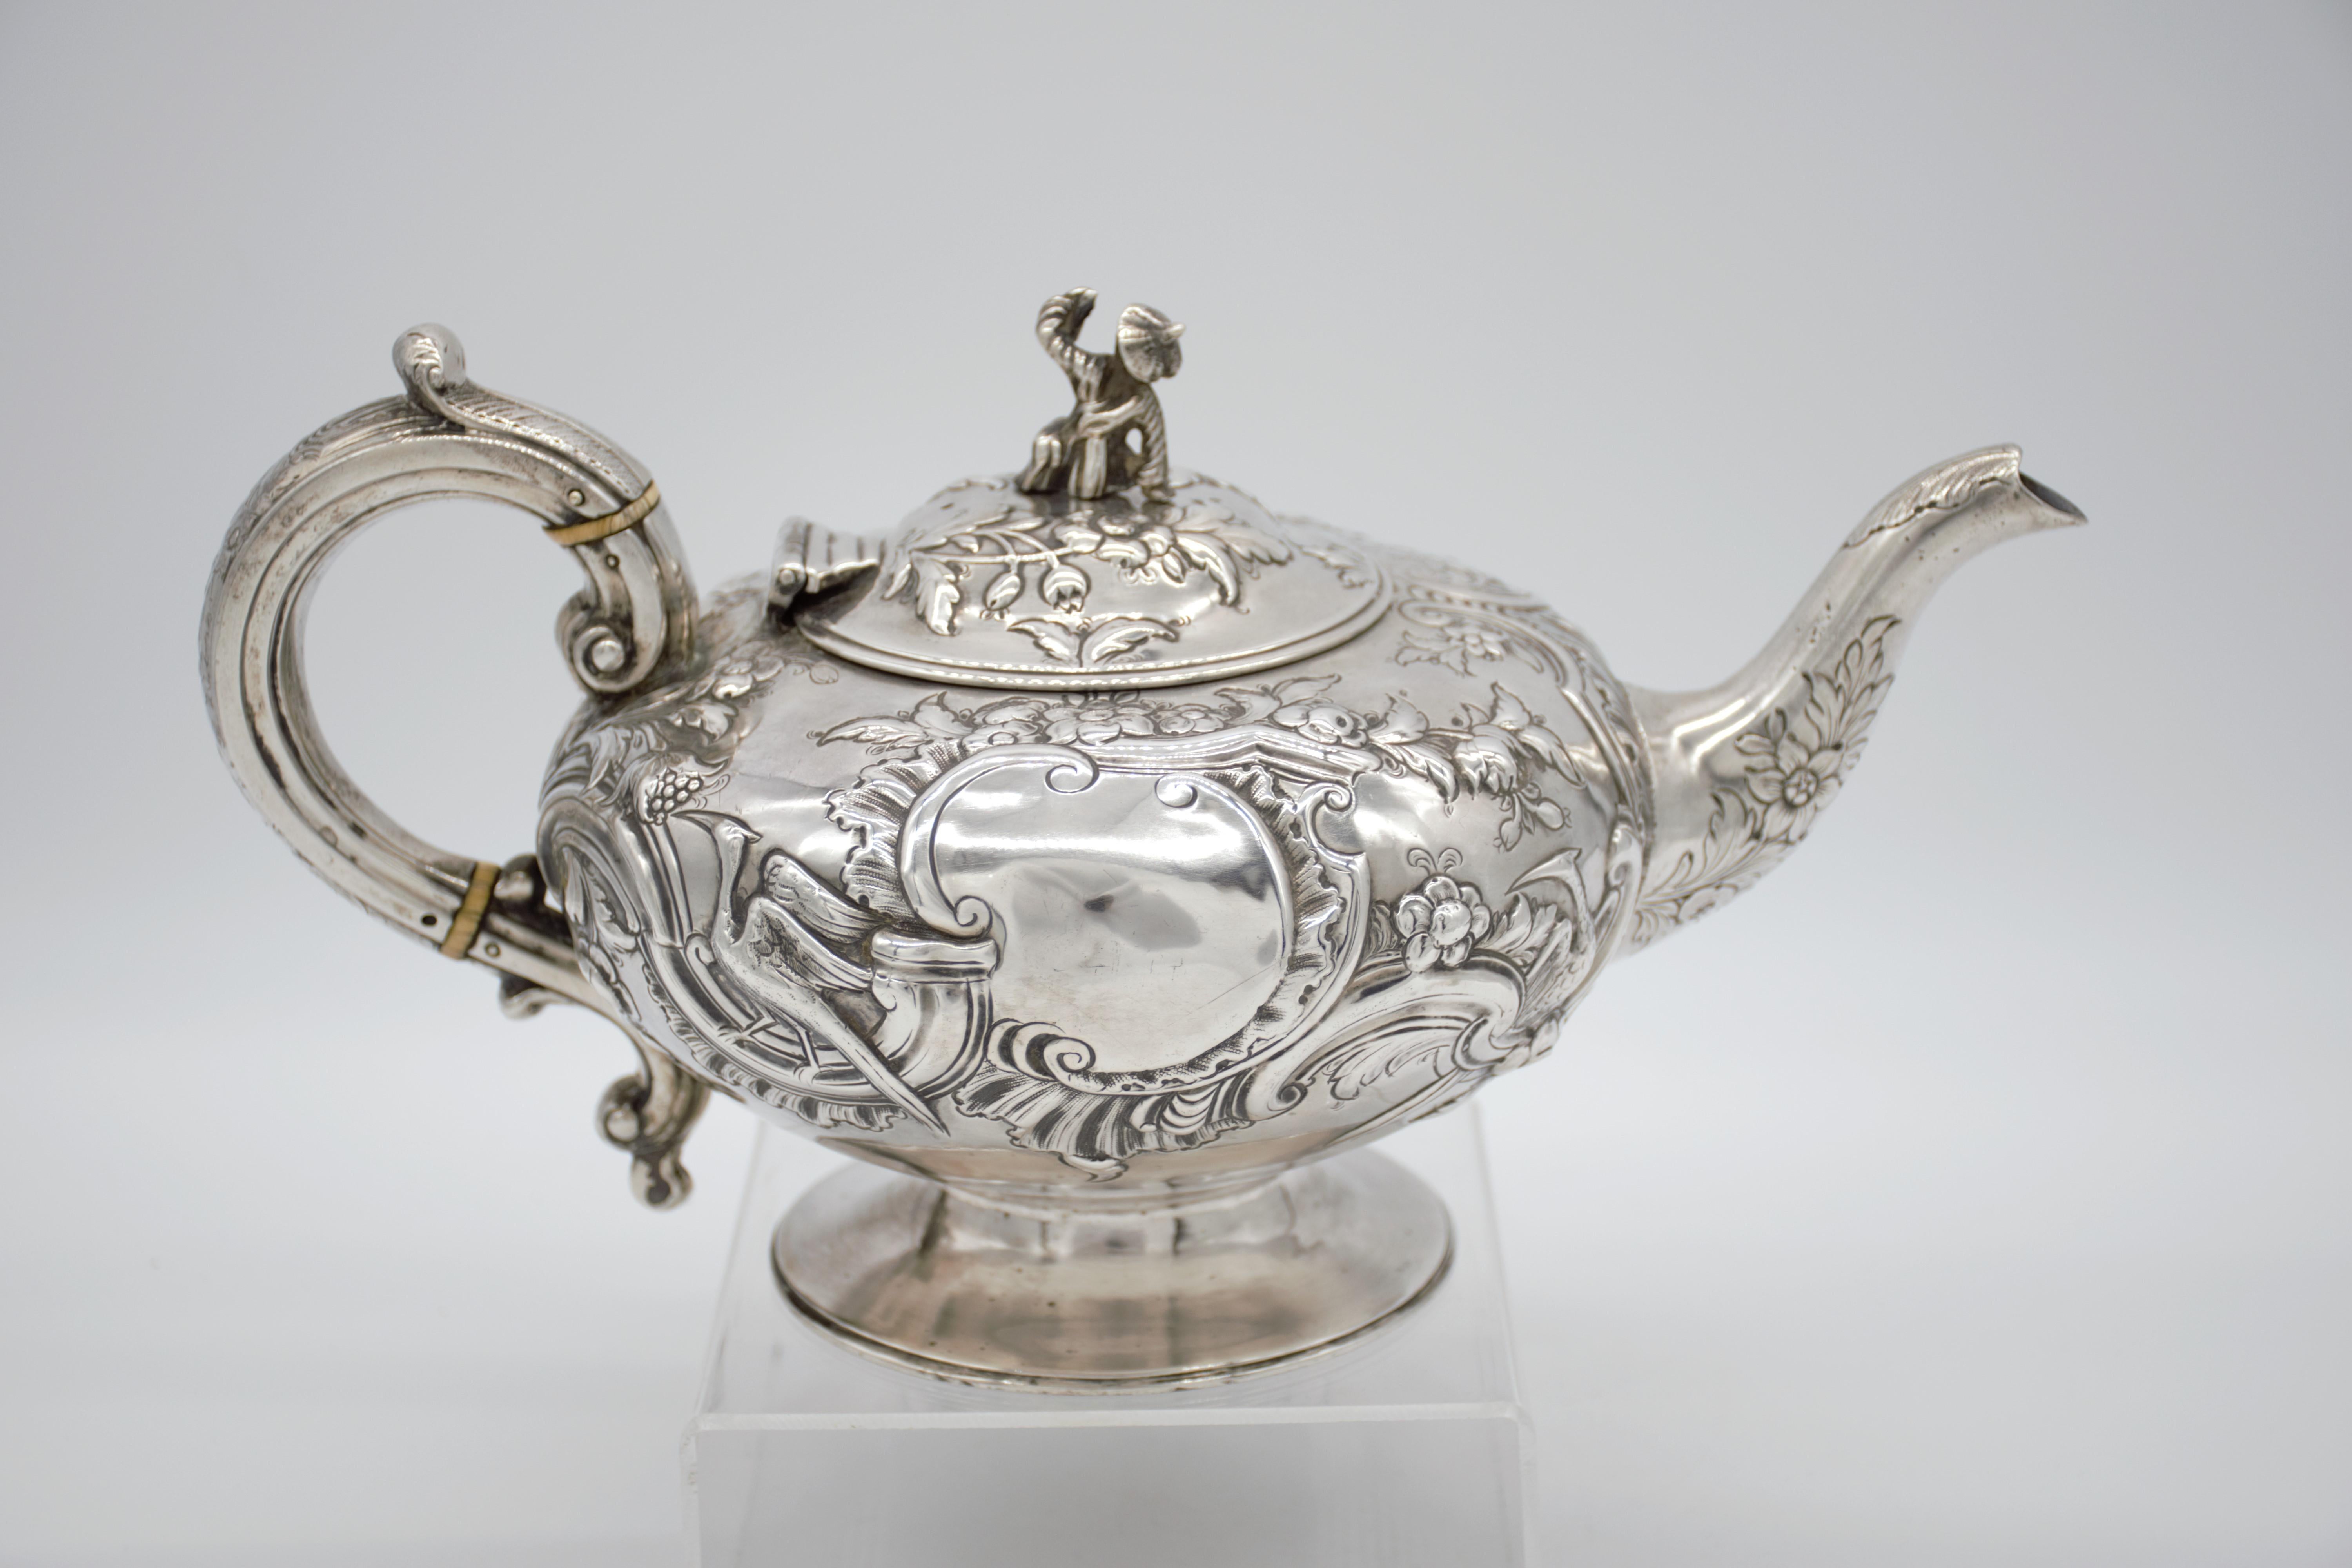 This rare and exceptional George III teapot is the work of preeminent Georgian silversmith Paul Storr, it is one of his earliest works, the date mark on this pieces of  the year 1793 which is the first year Storr marked items with his own initials